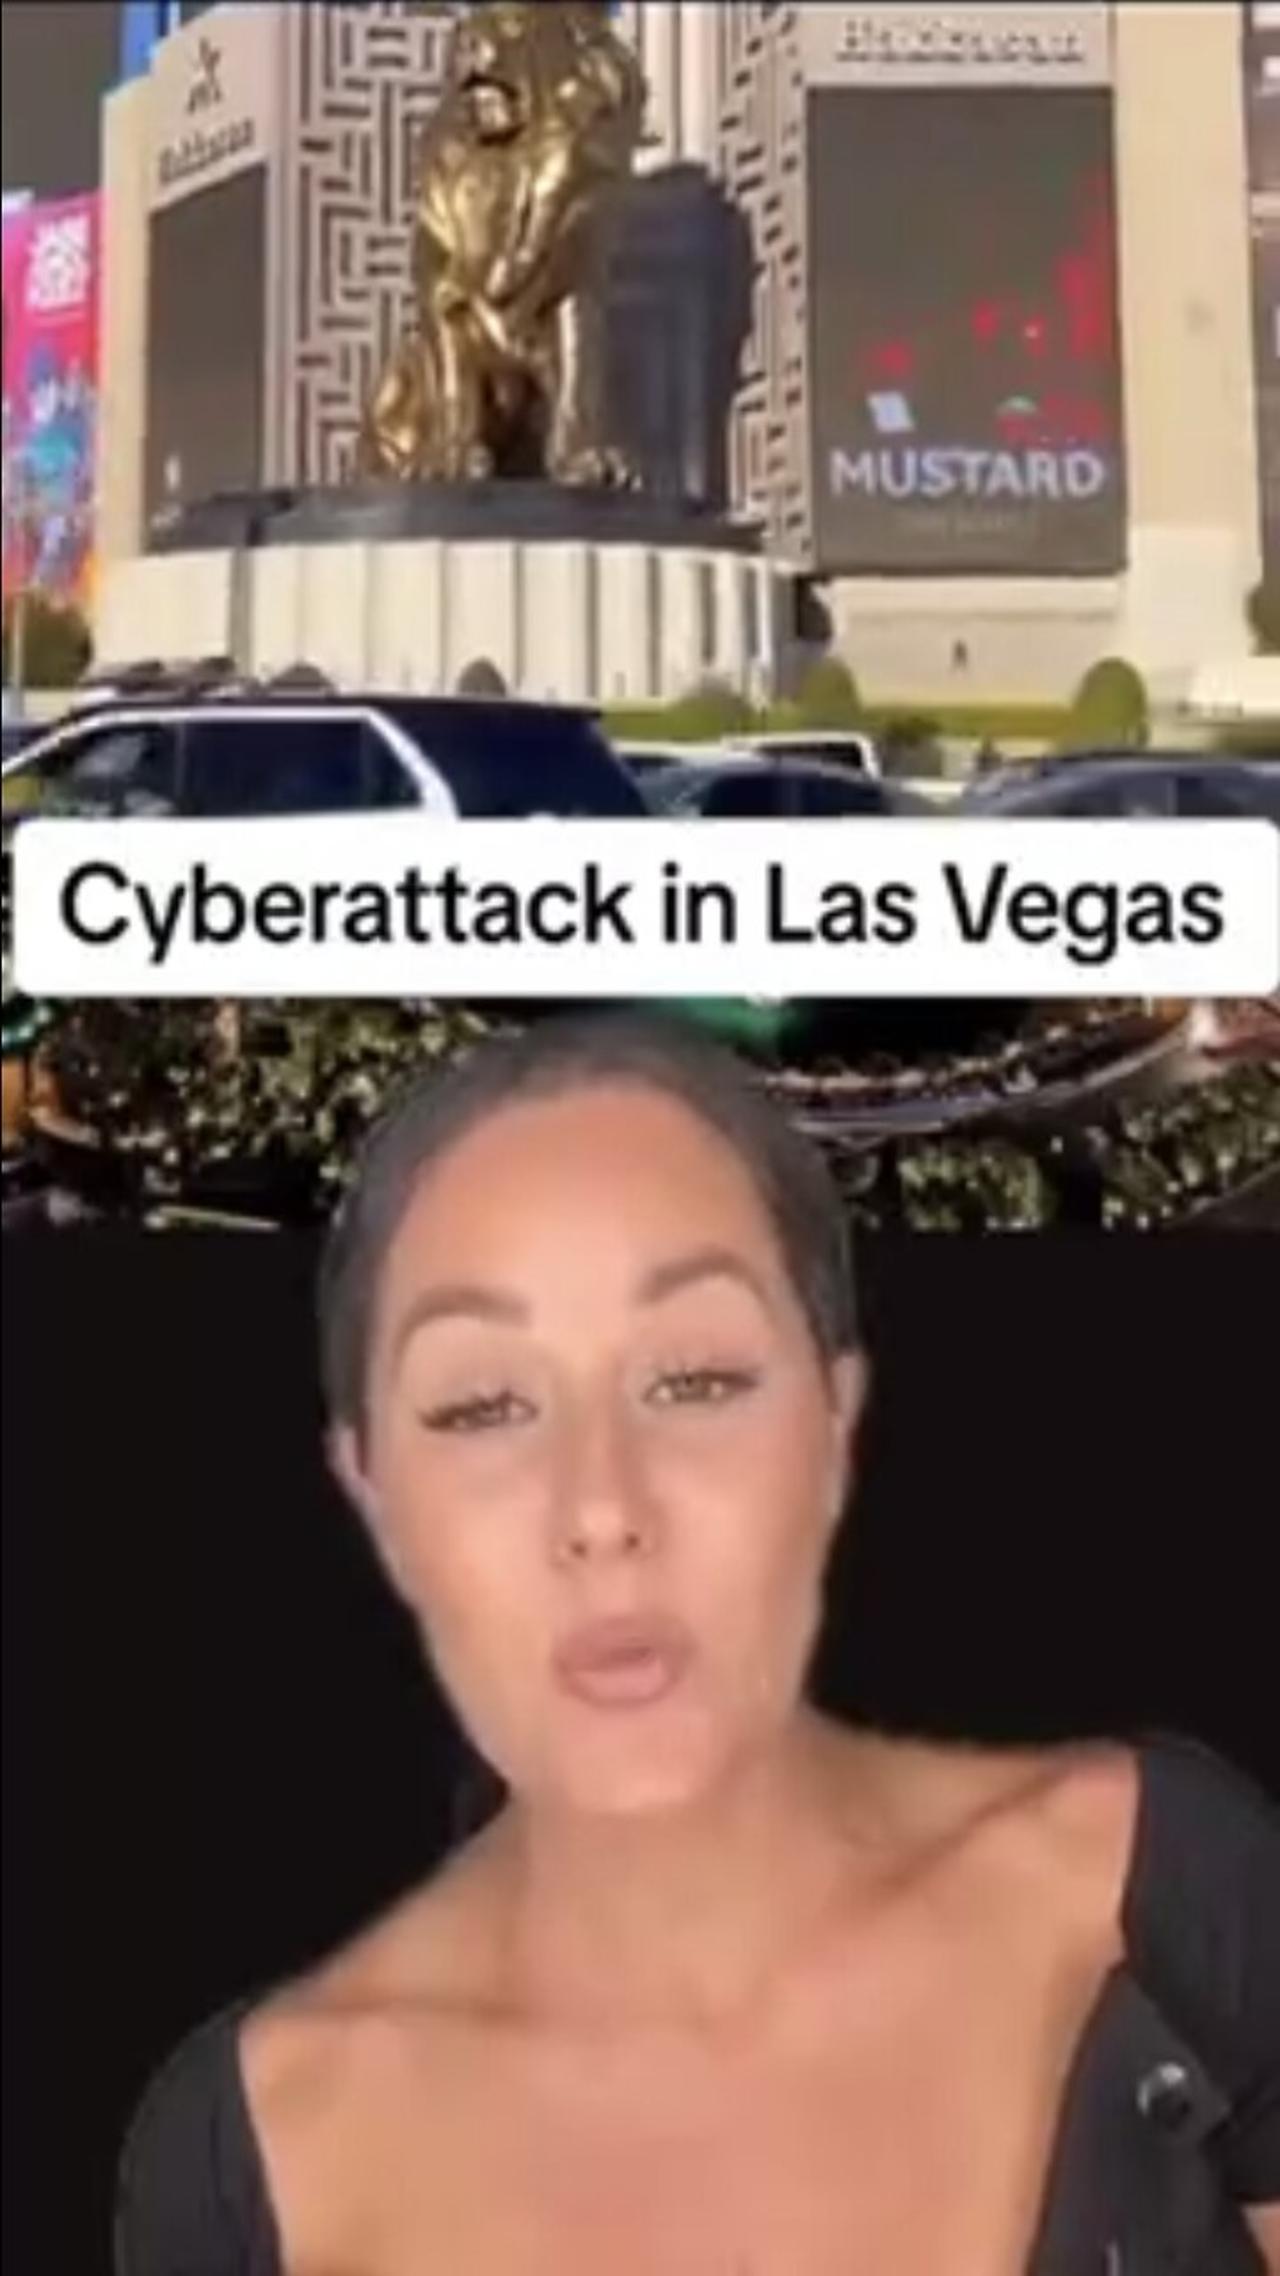 MGM properties in Vegas and other casinos under cyber attacks since Sunday 9/10